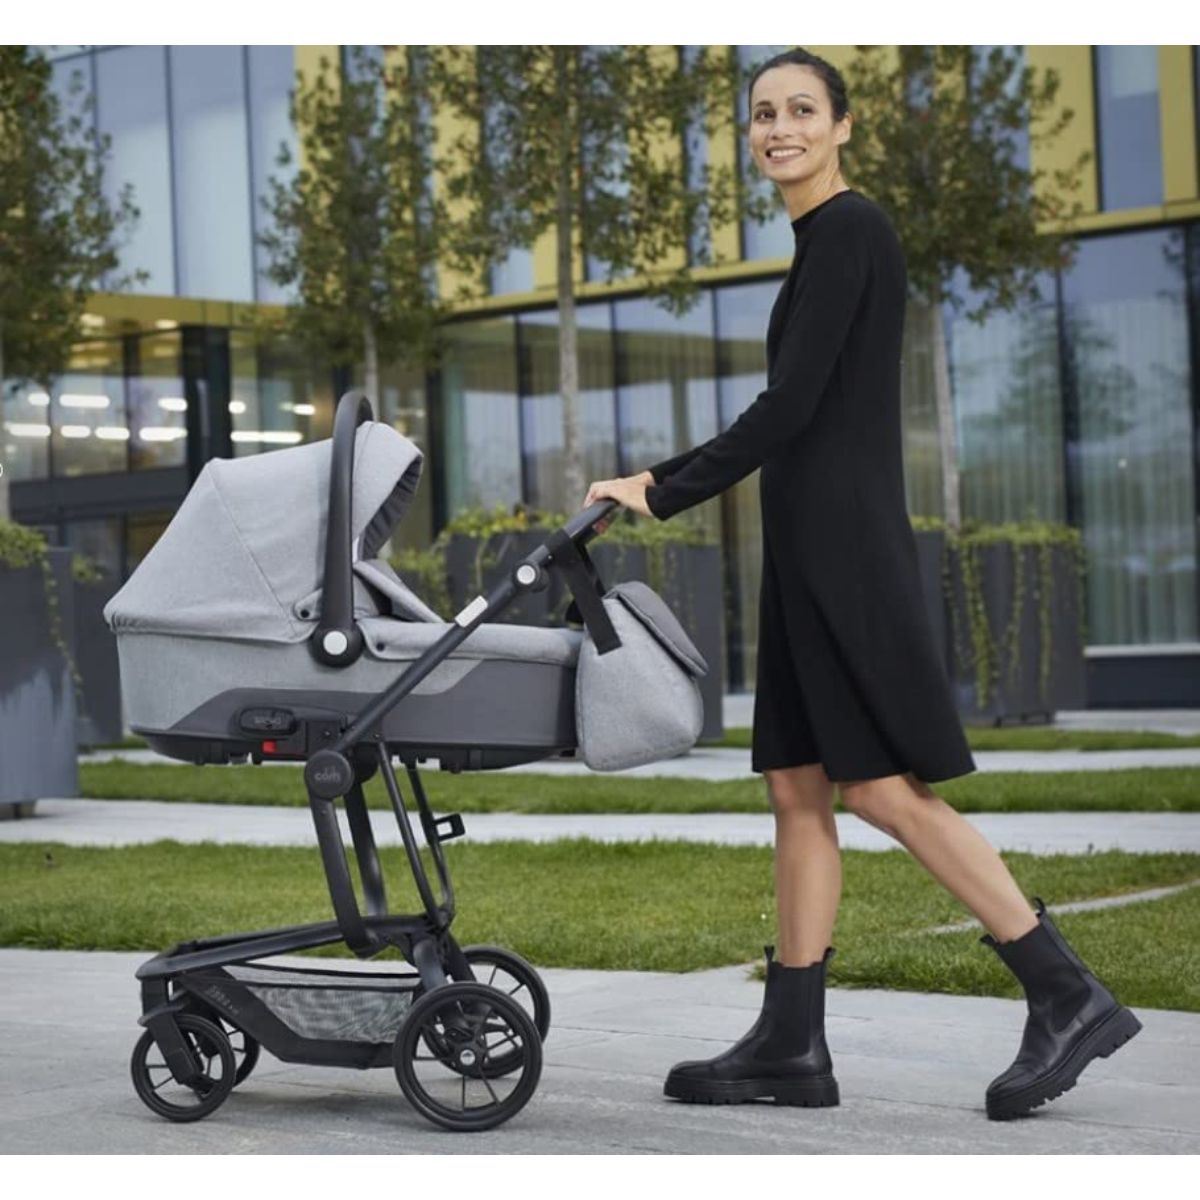 Cam - Taski Sport Baby Travel System - Gray -  super compact and lightweight travel system, Very spacious, from 0 to 4 years old (22 kg.), Rocking Function, Made in italy, Aluminium frame.